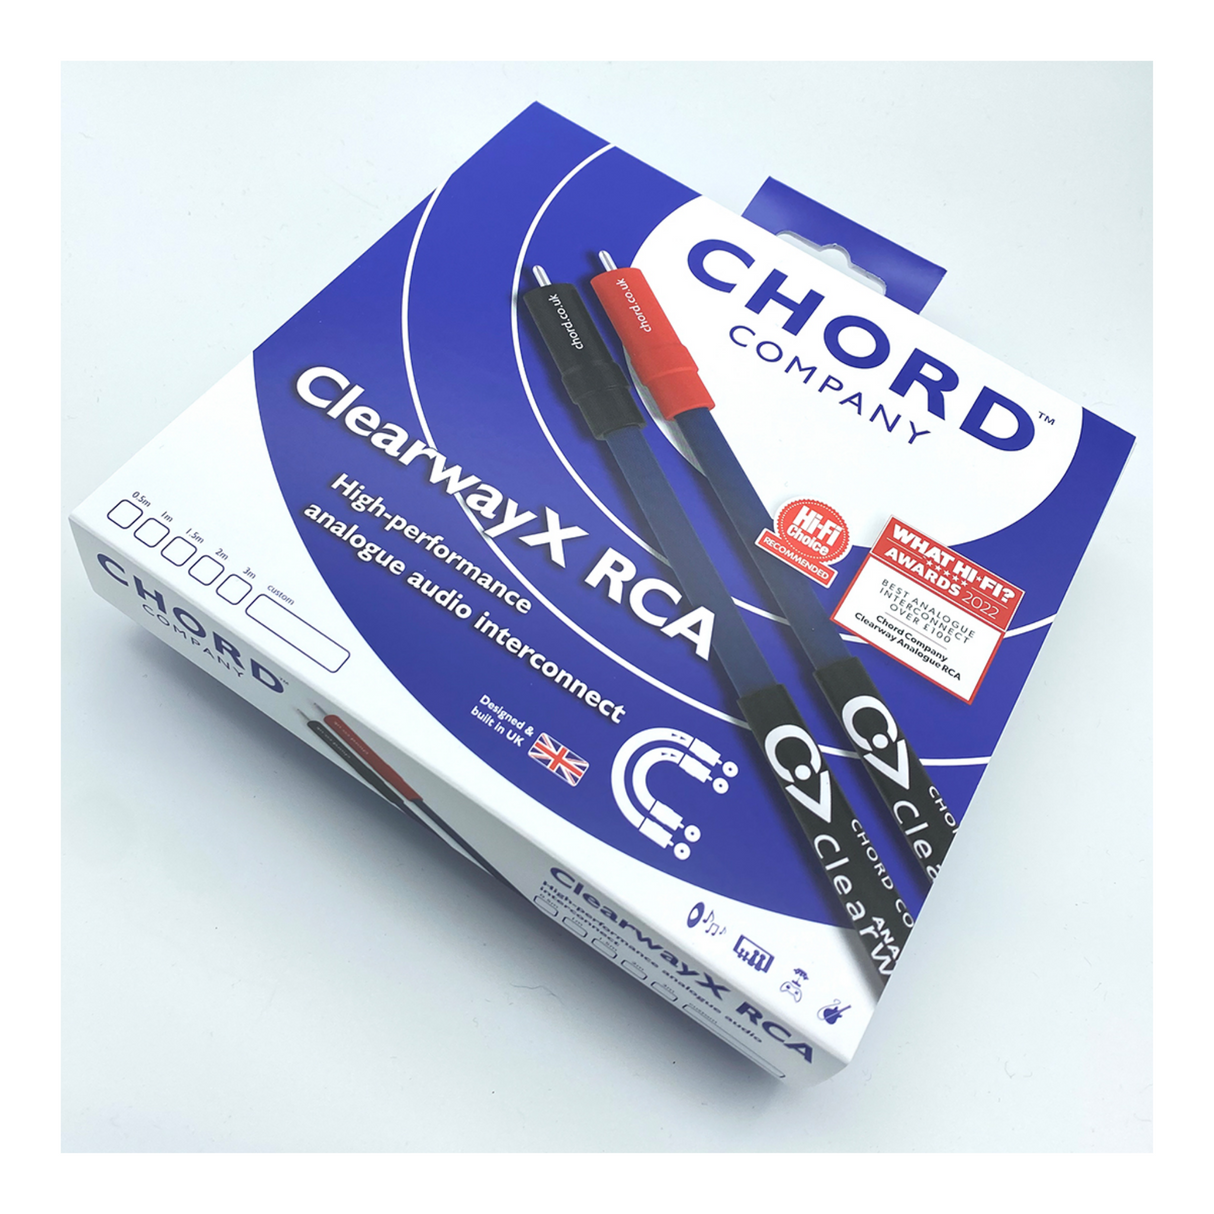 Chord Clearway Analogue RCA (Turntable)